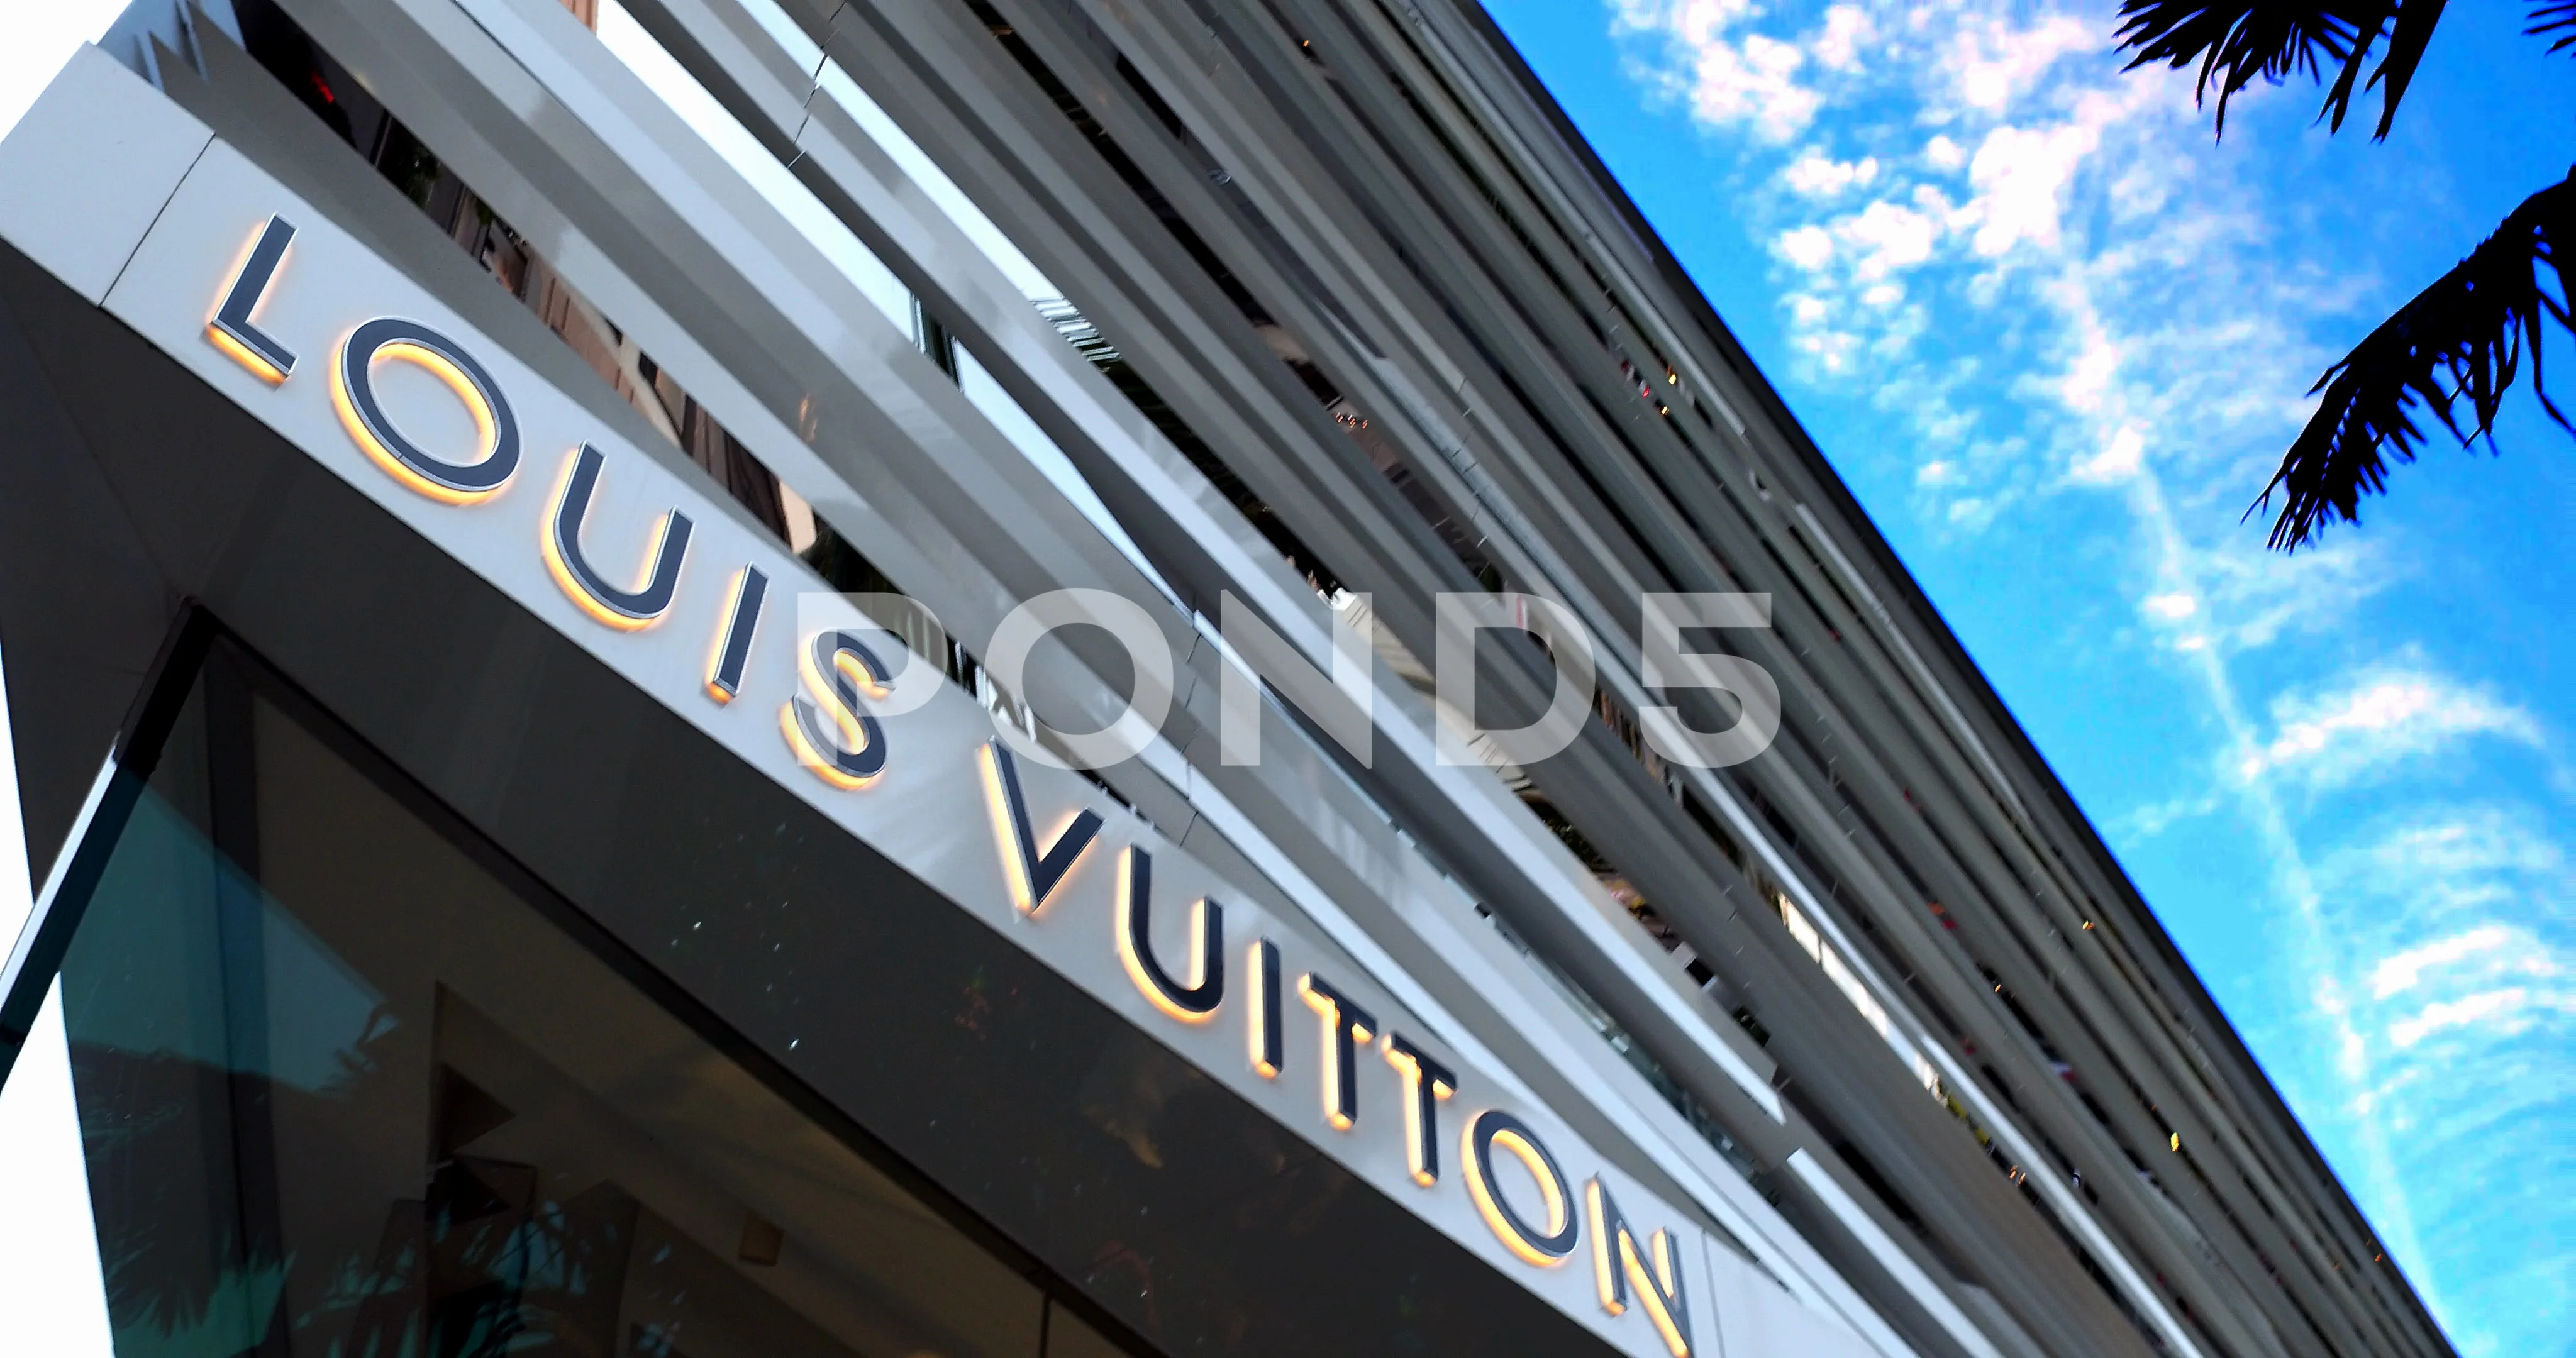 Louis Vuitton on Rodeo Drive in Beverly Hills. Photo by, George